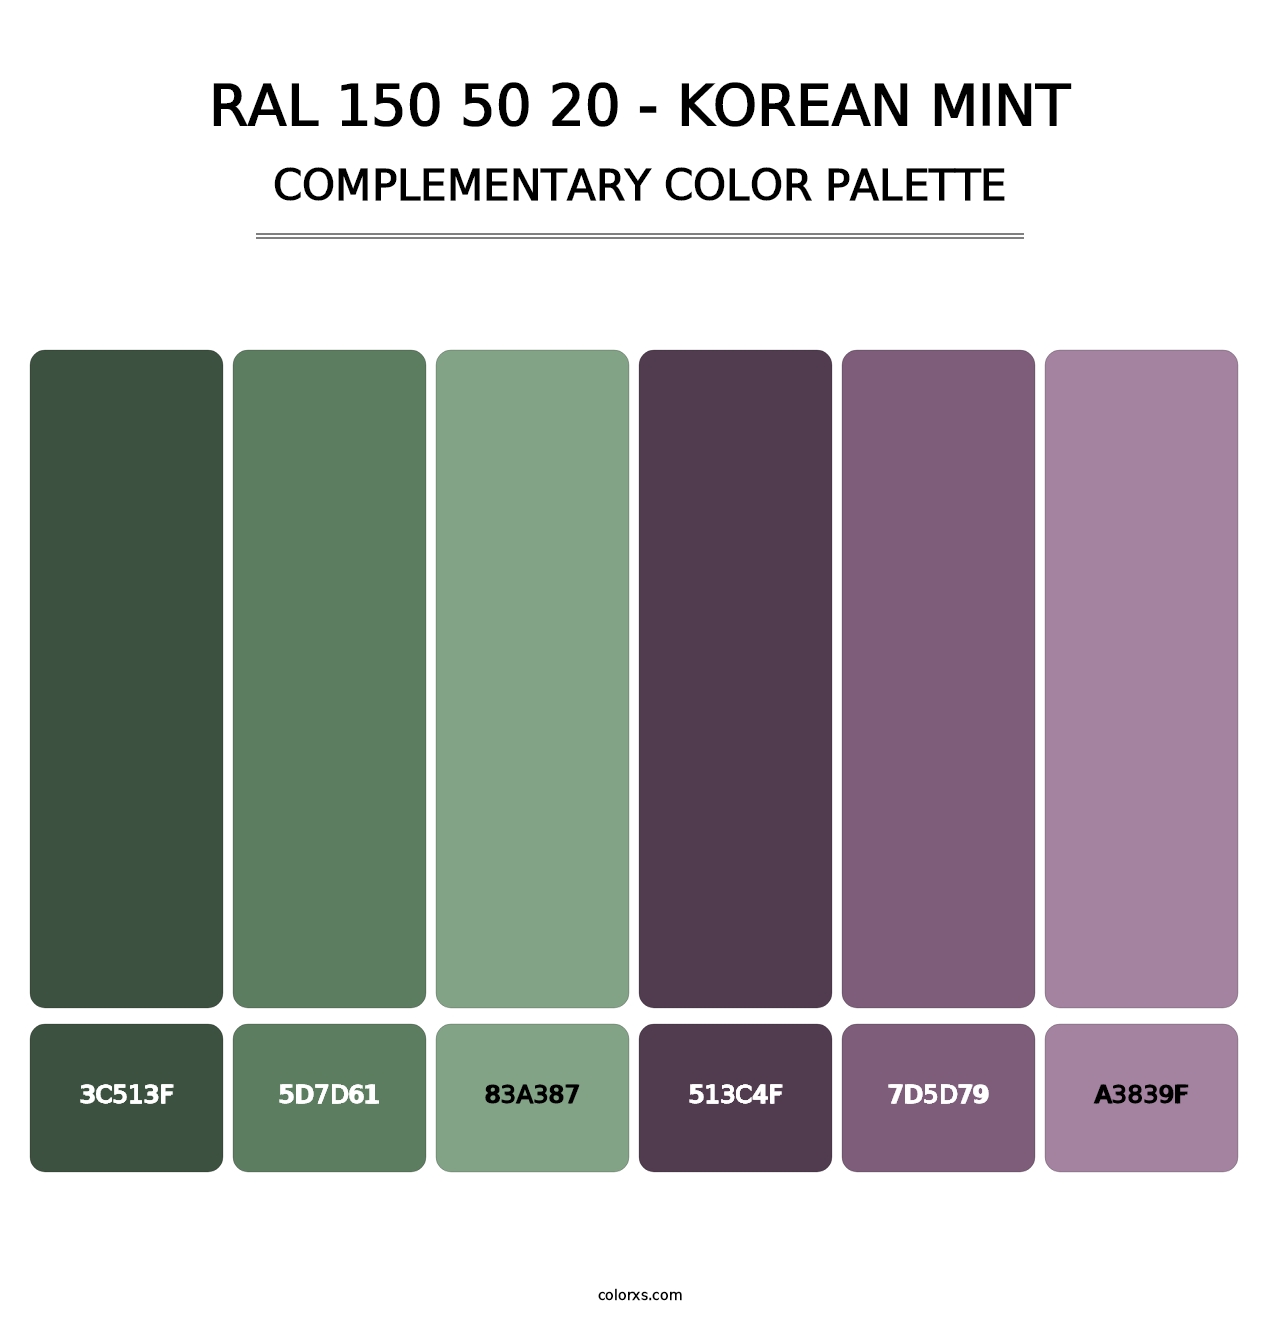 RAL 150 50 20 - Korean Mint - Complementary Color Palette